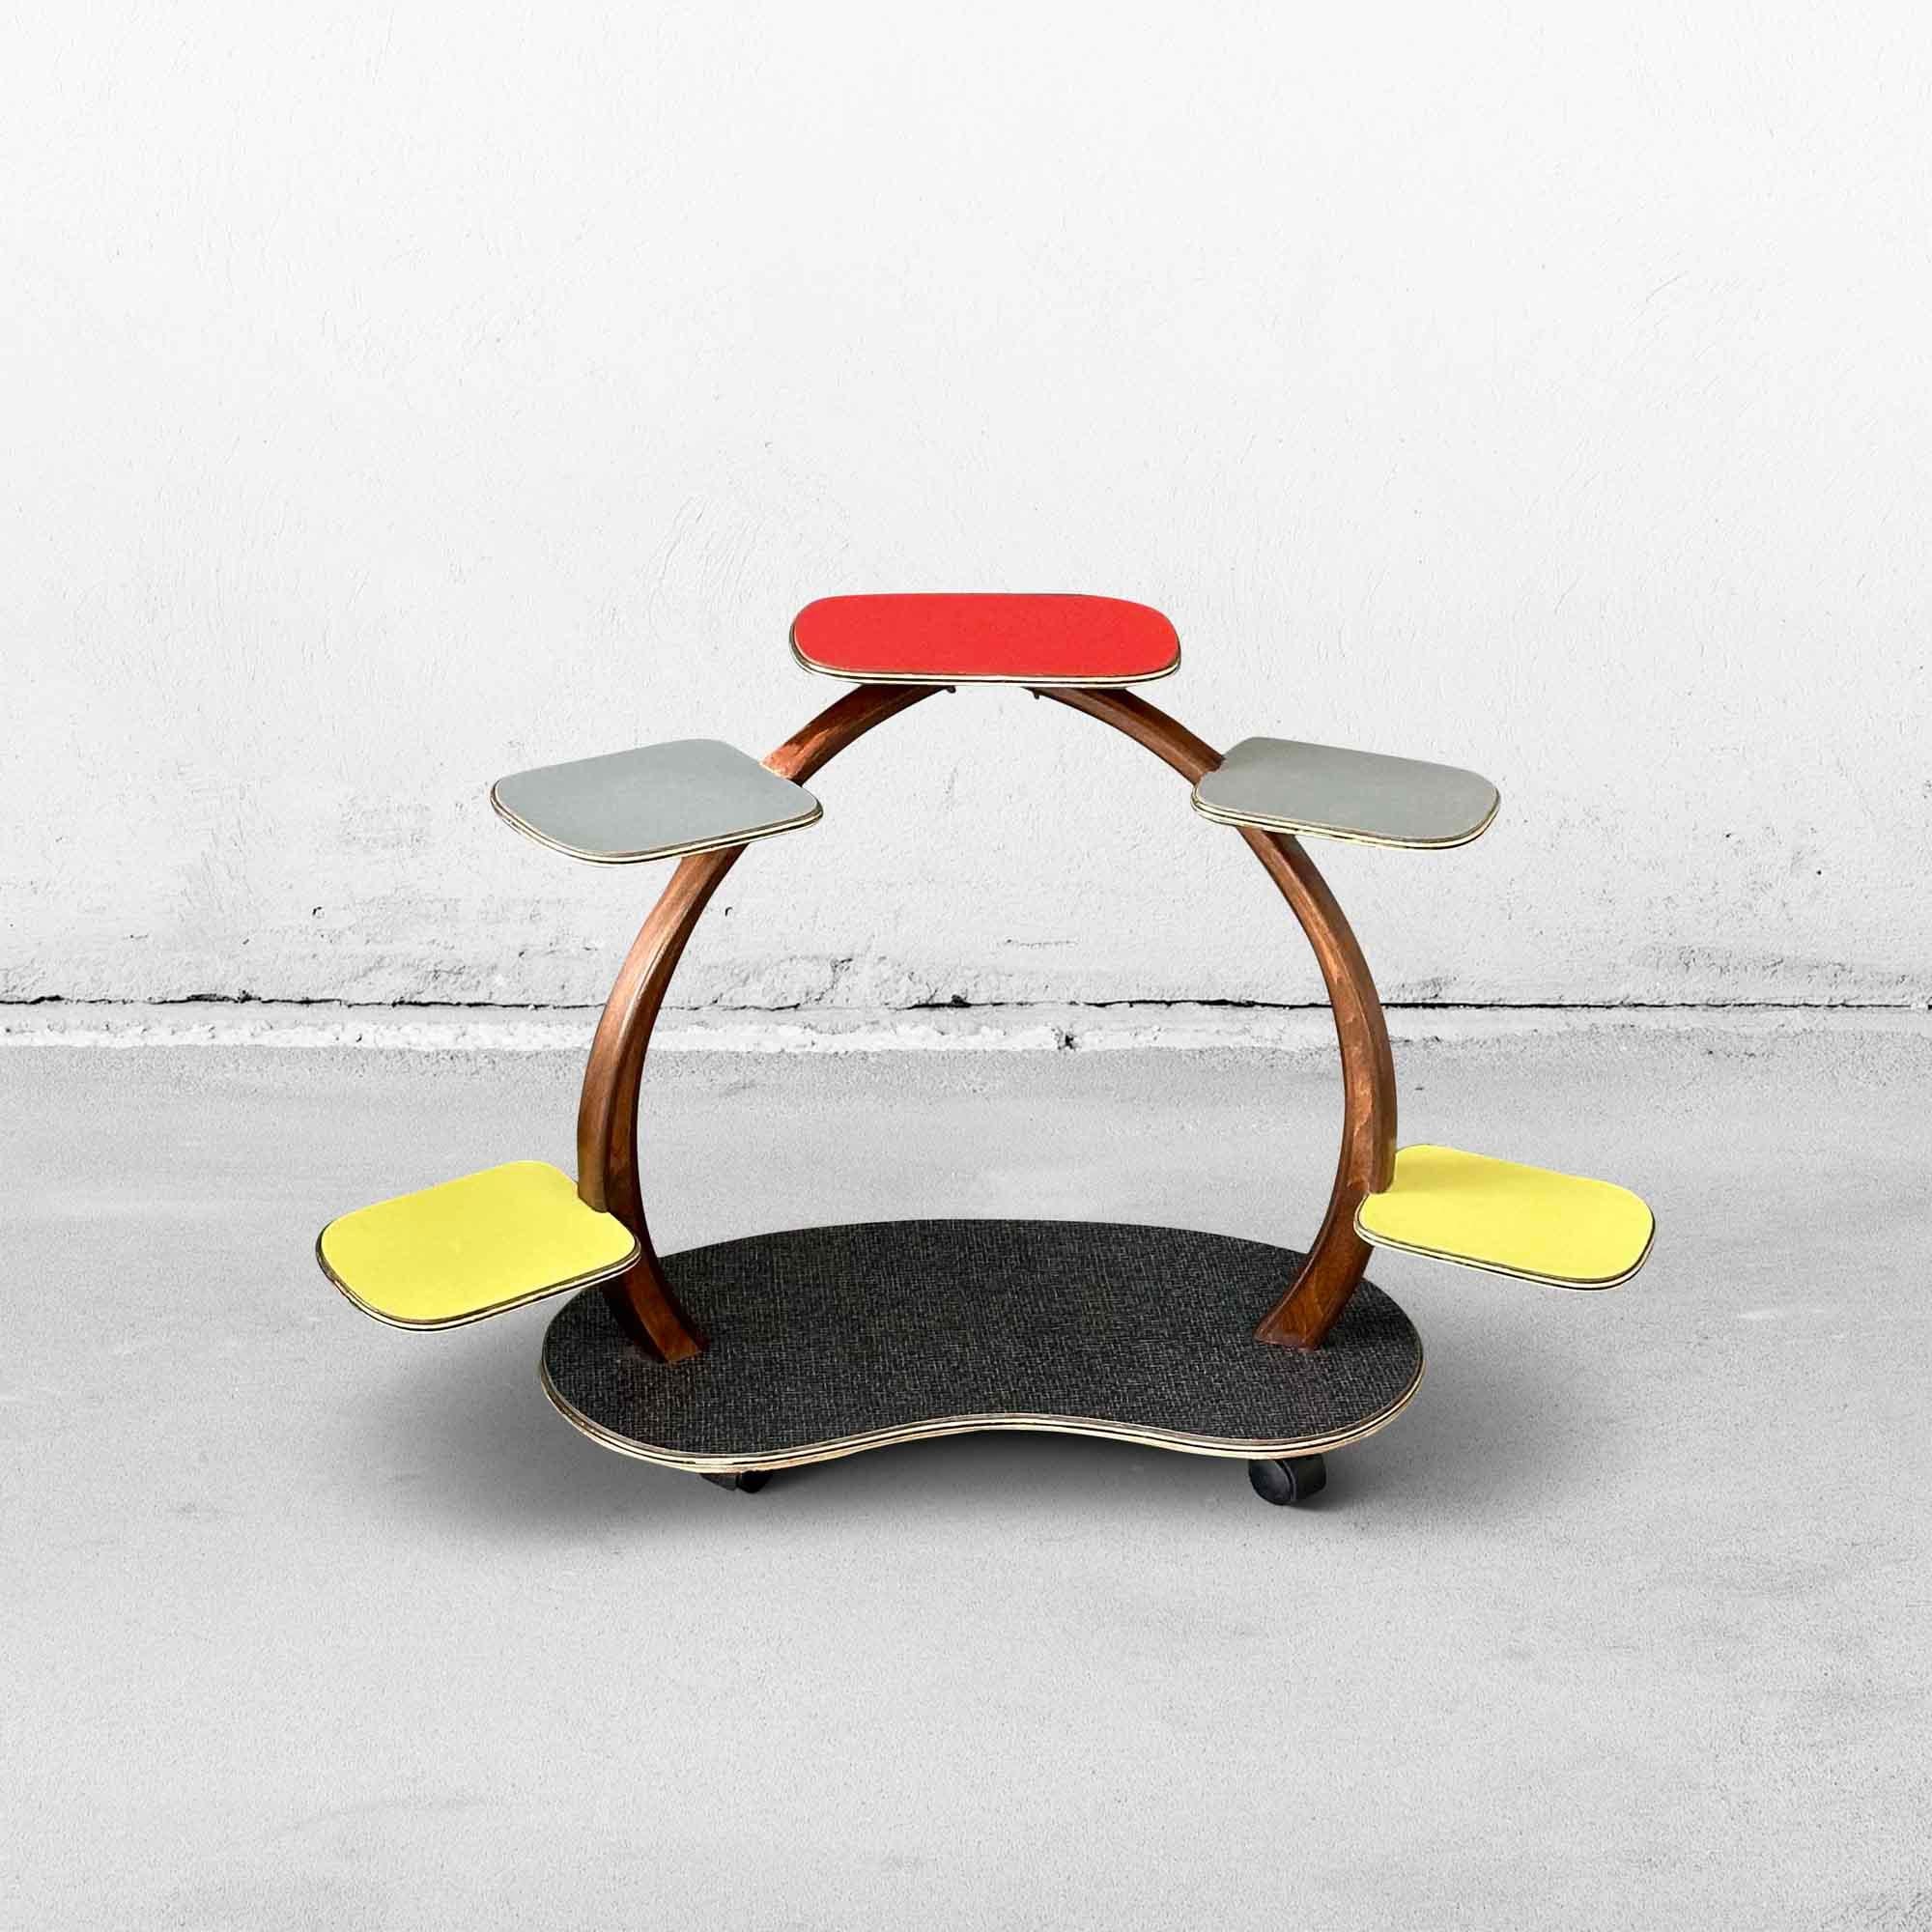 Mid-century plant stand from the 1960s. This colorful little table is made of wood and Formica in yellow, gray, red, and dark gray with a pattern. The shelves have the typical gold-colored band. The wood has been restored at the top. The special